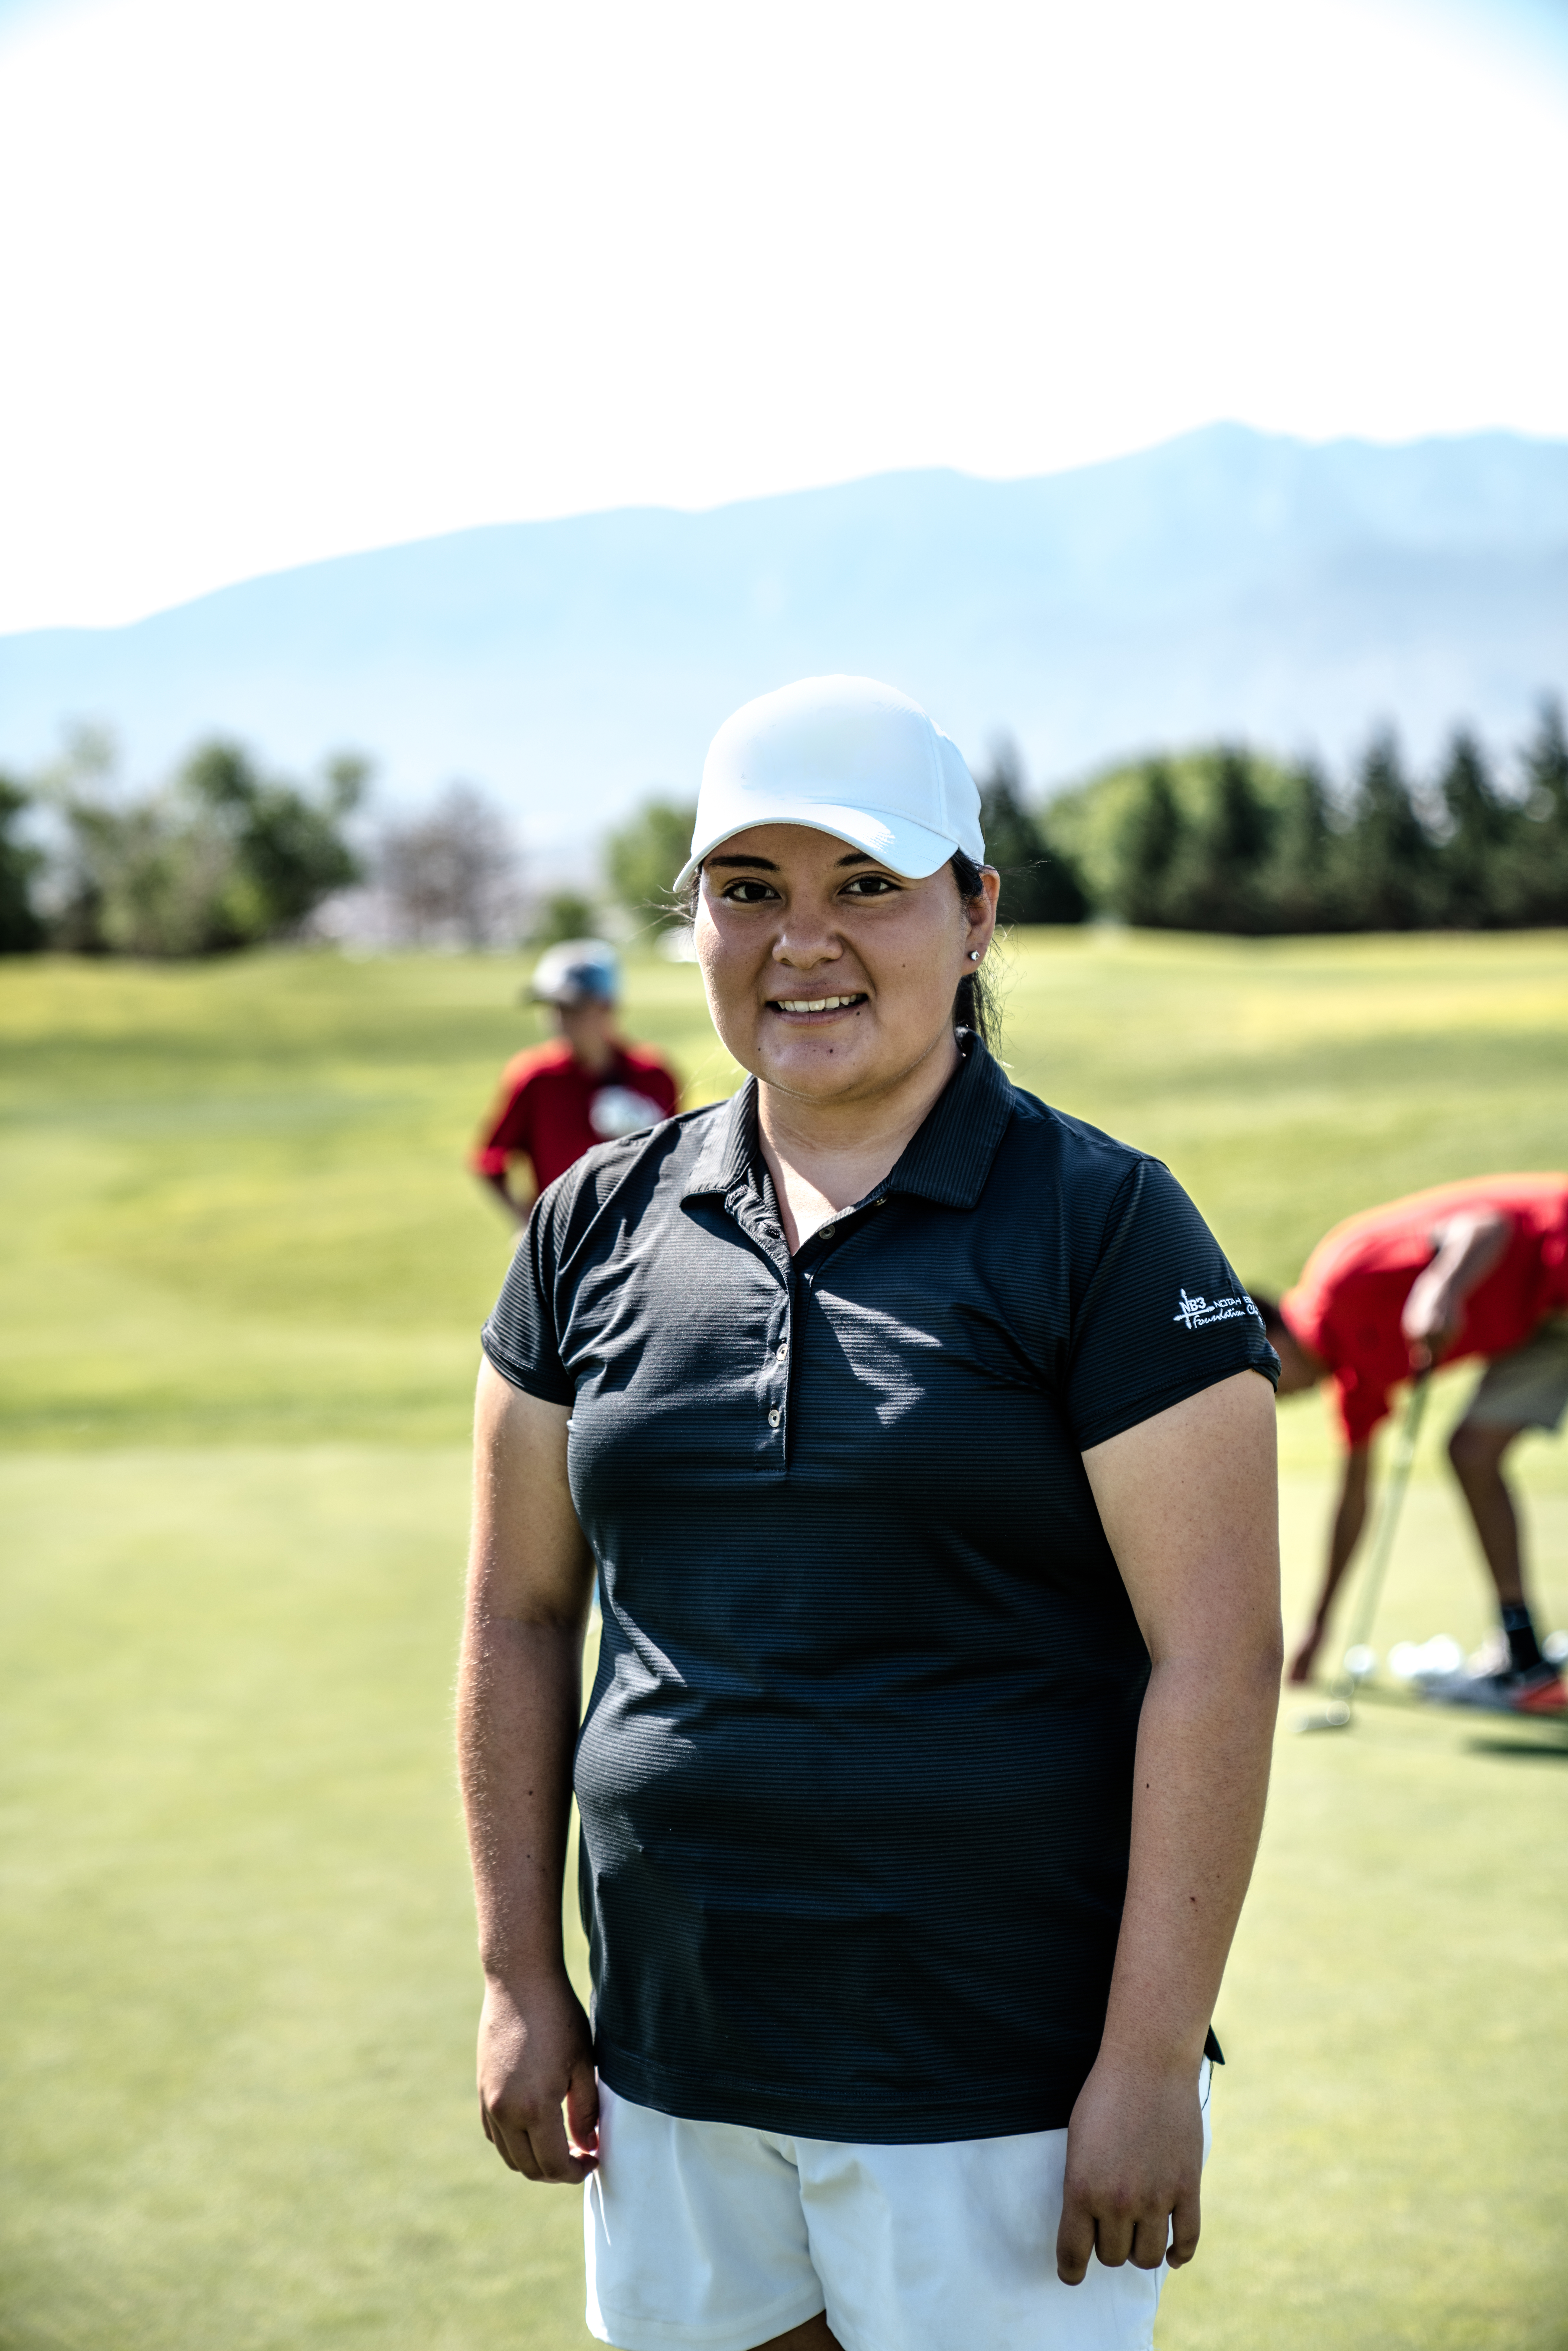 Smiling woman standing on golf course